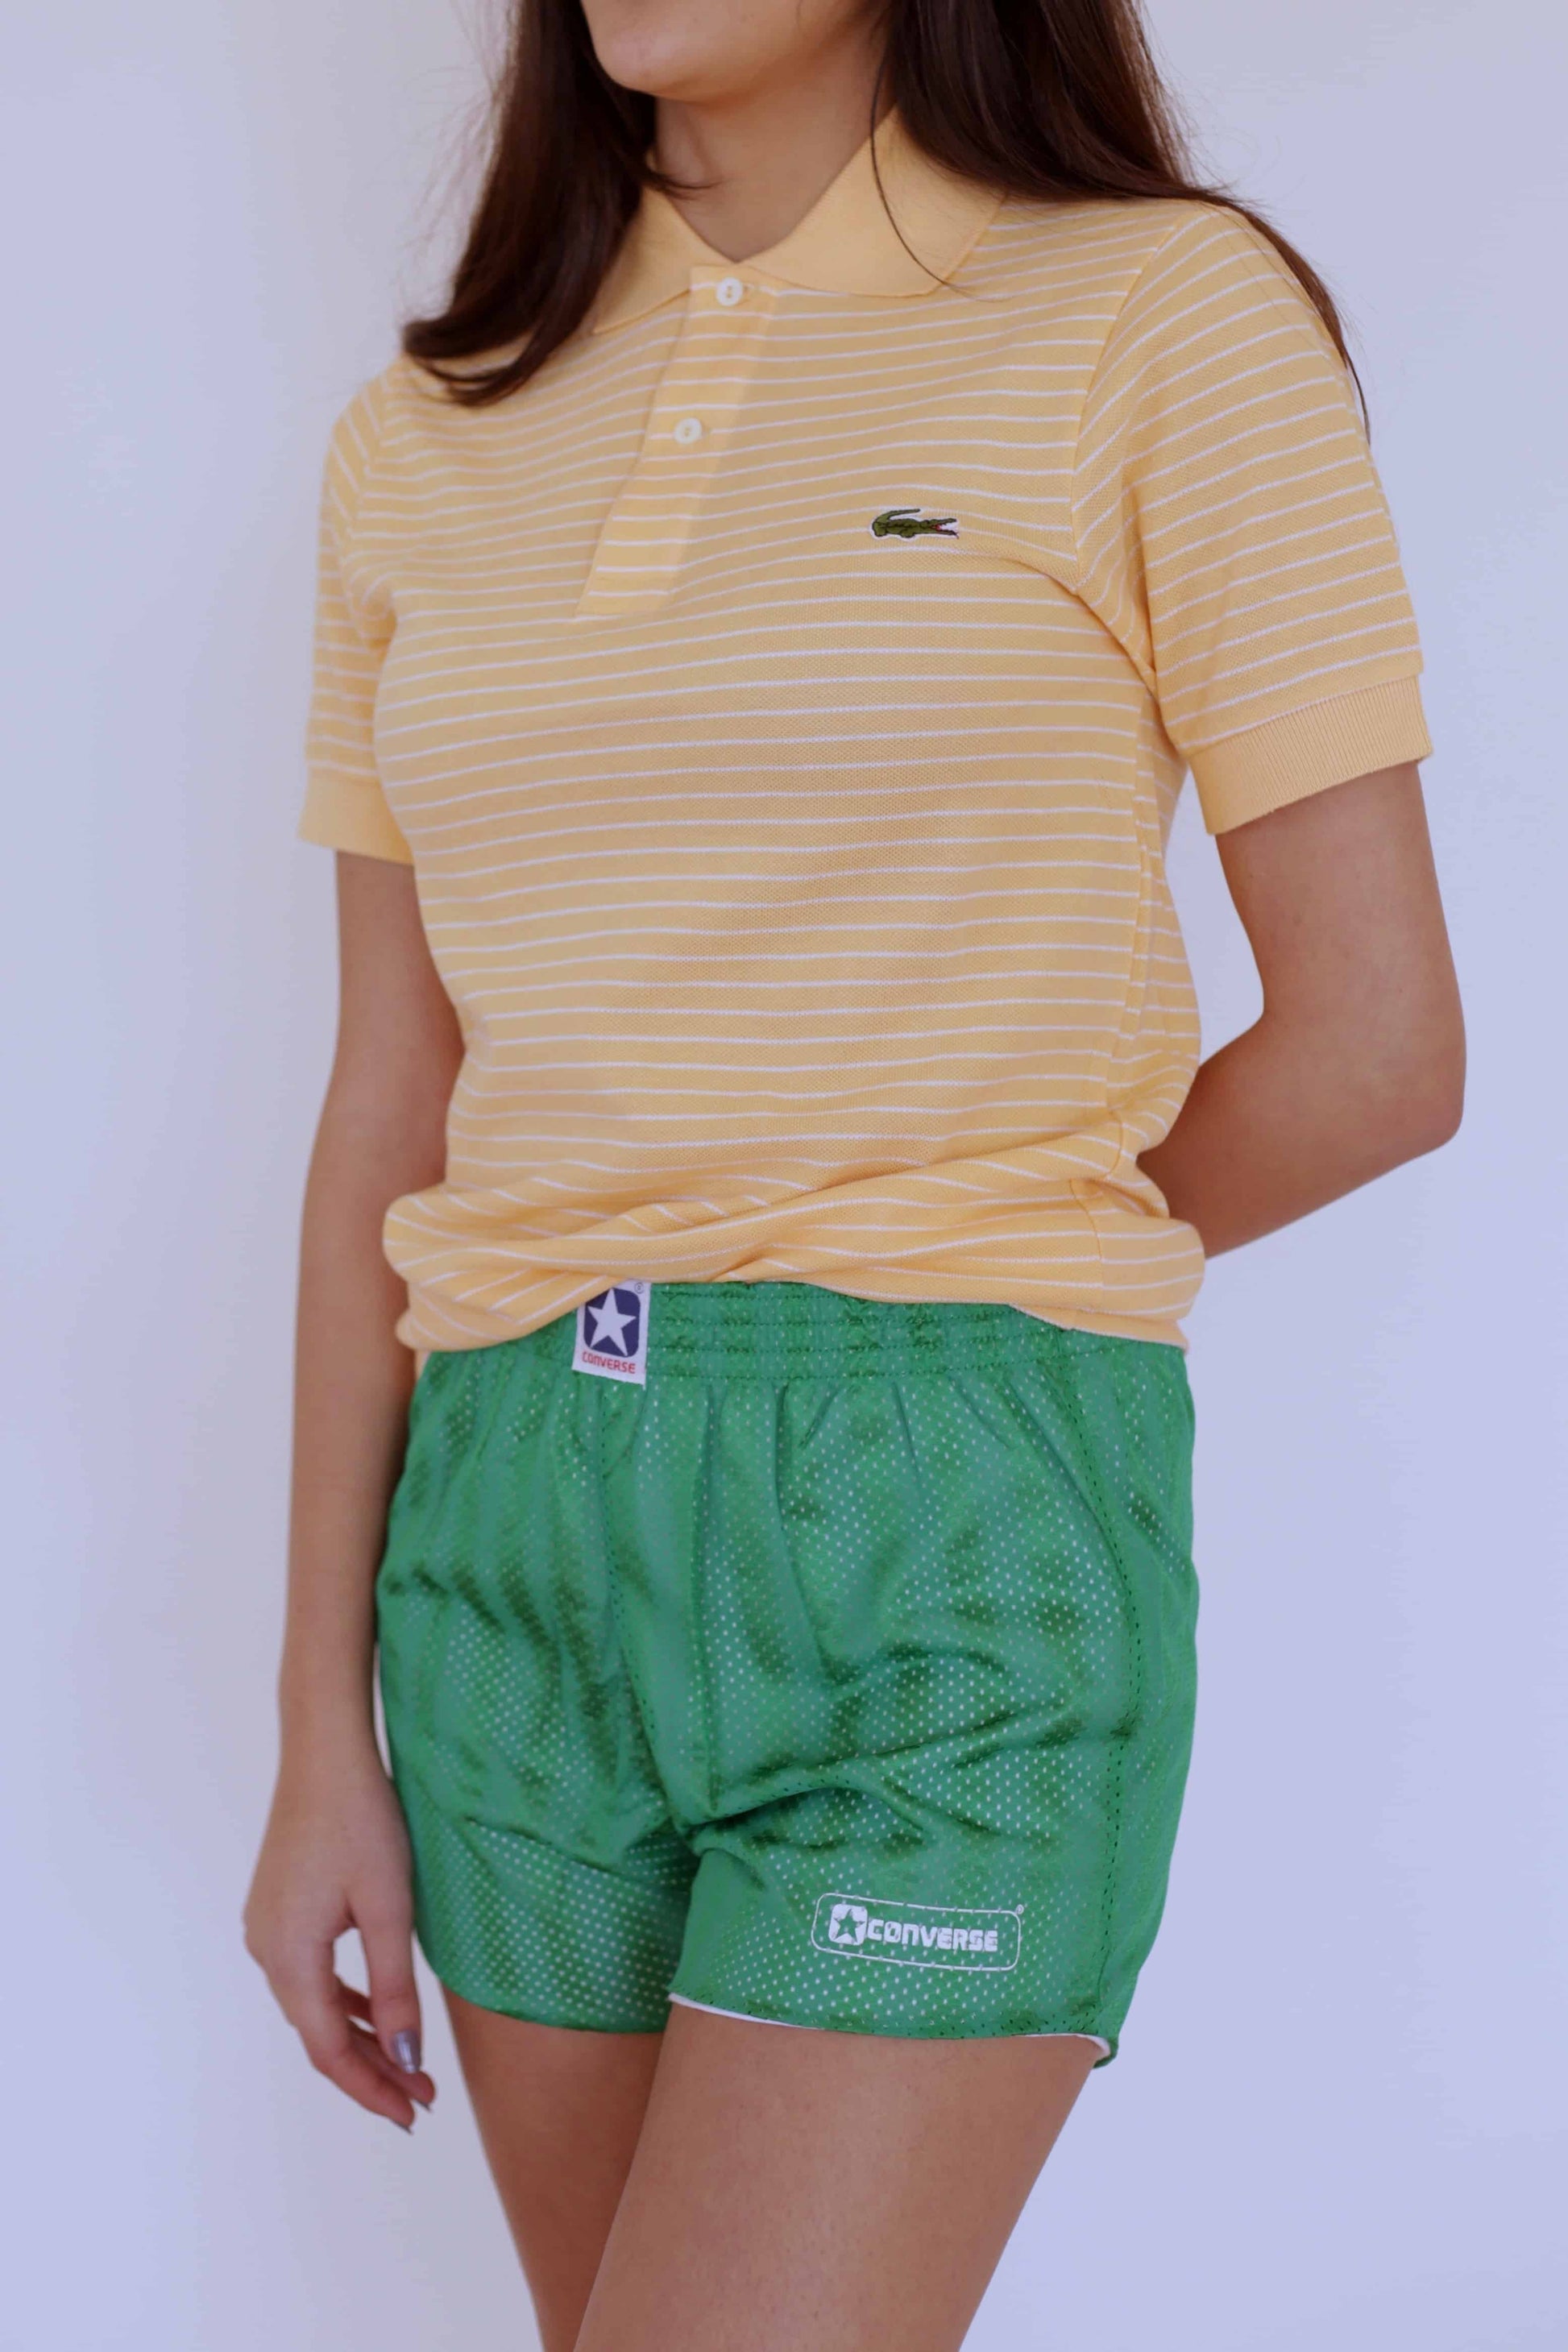 LACOSTE Striped Polo in melon color with white stripes worn with green shorts